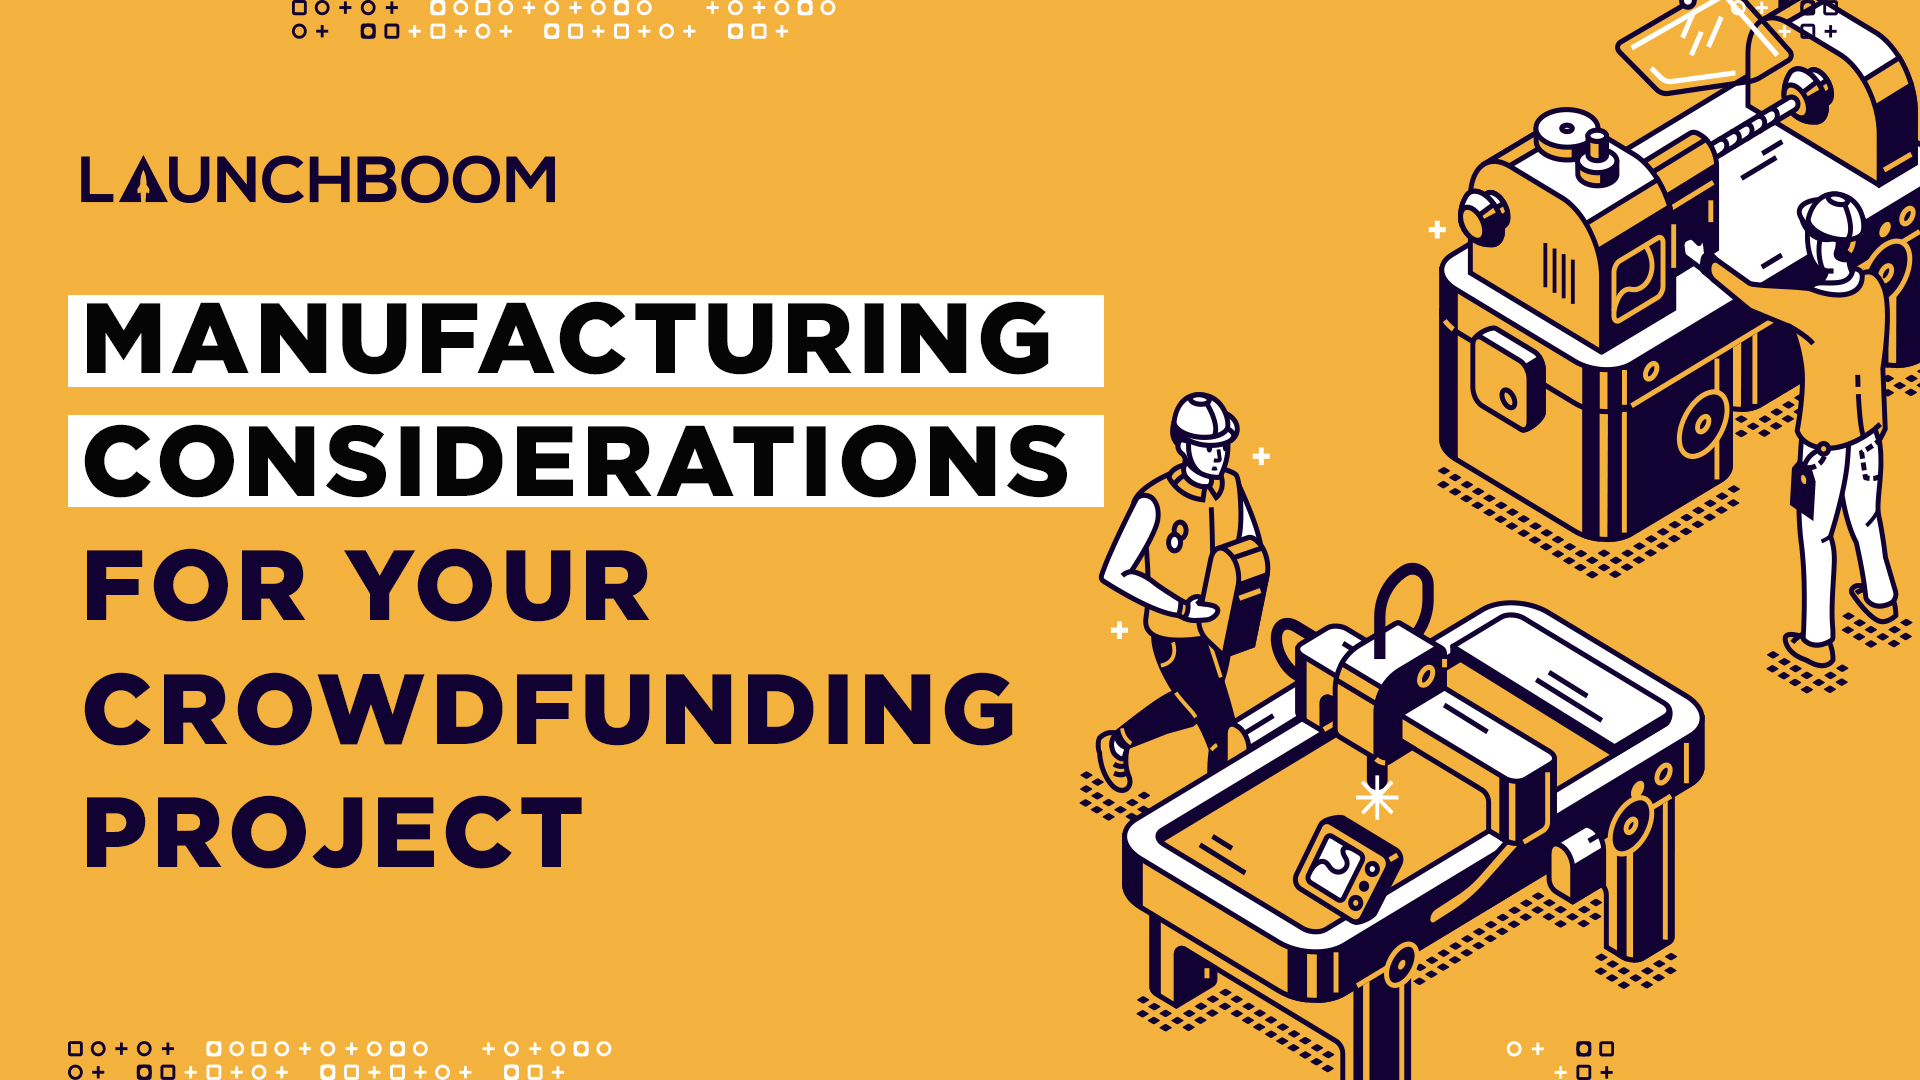 Manufacturing considerations for crowdfunding projects